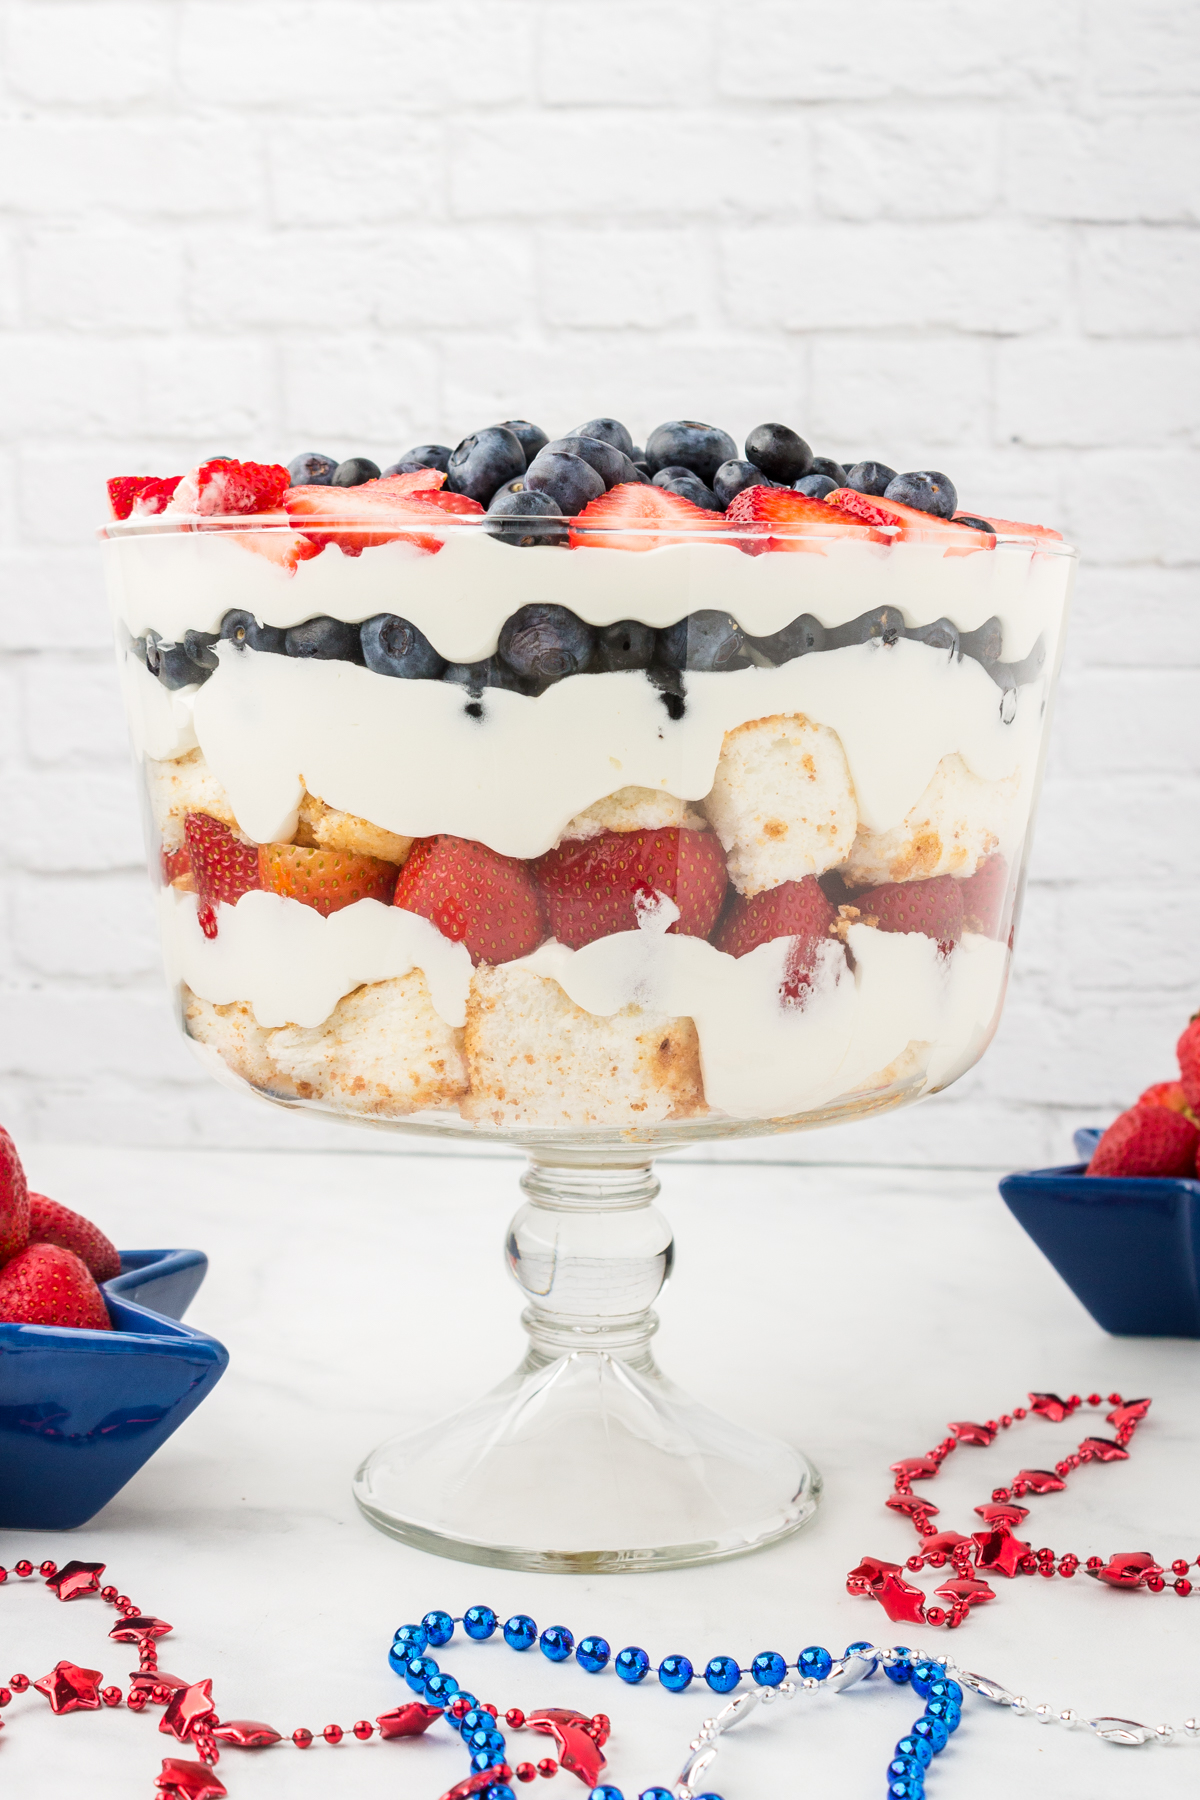 Patriotic Red, White And Blue Berry Trifle Recipe in a trifle bowl